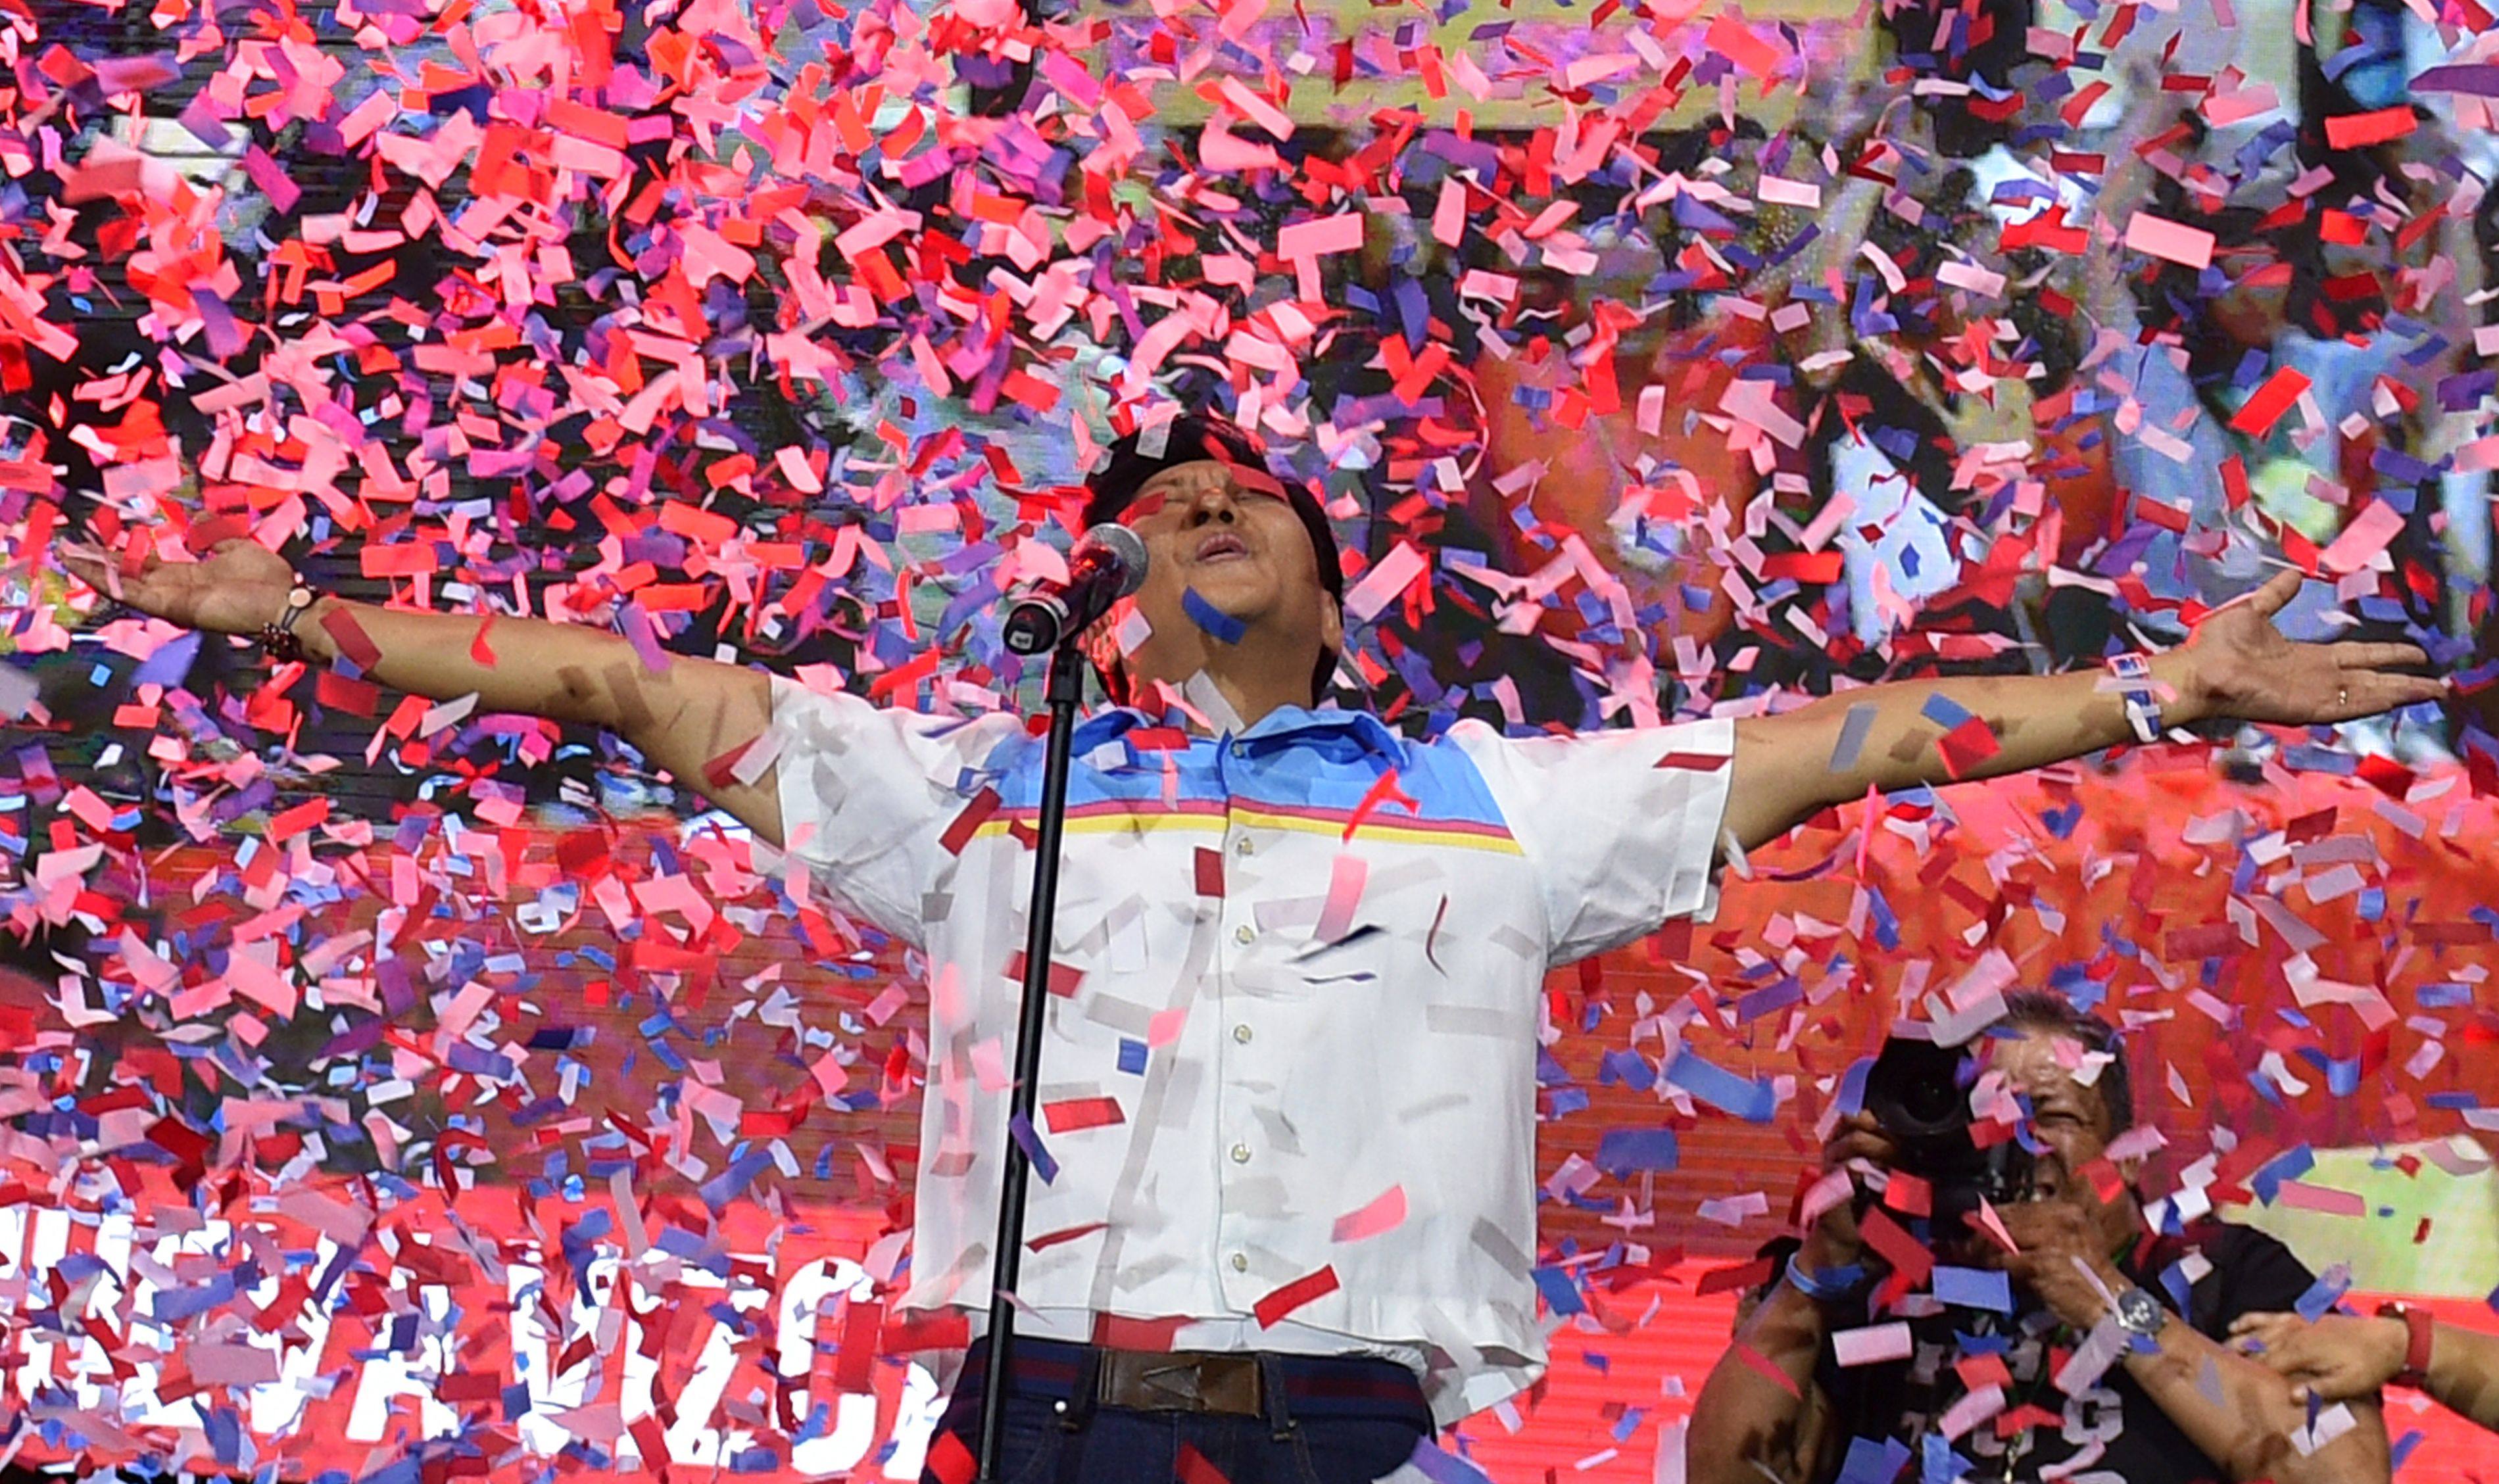 Ferdinand ‘Bongbong’ Marcos Jnr, son of the late Philippine dictator, is running for the presidency. Photo: AFP